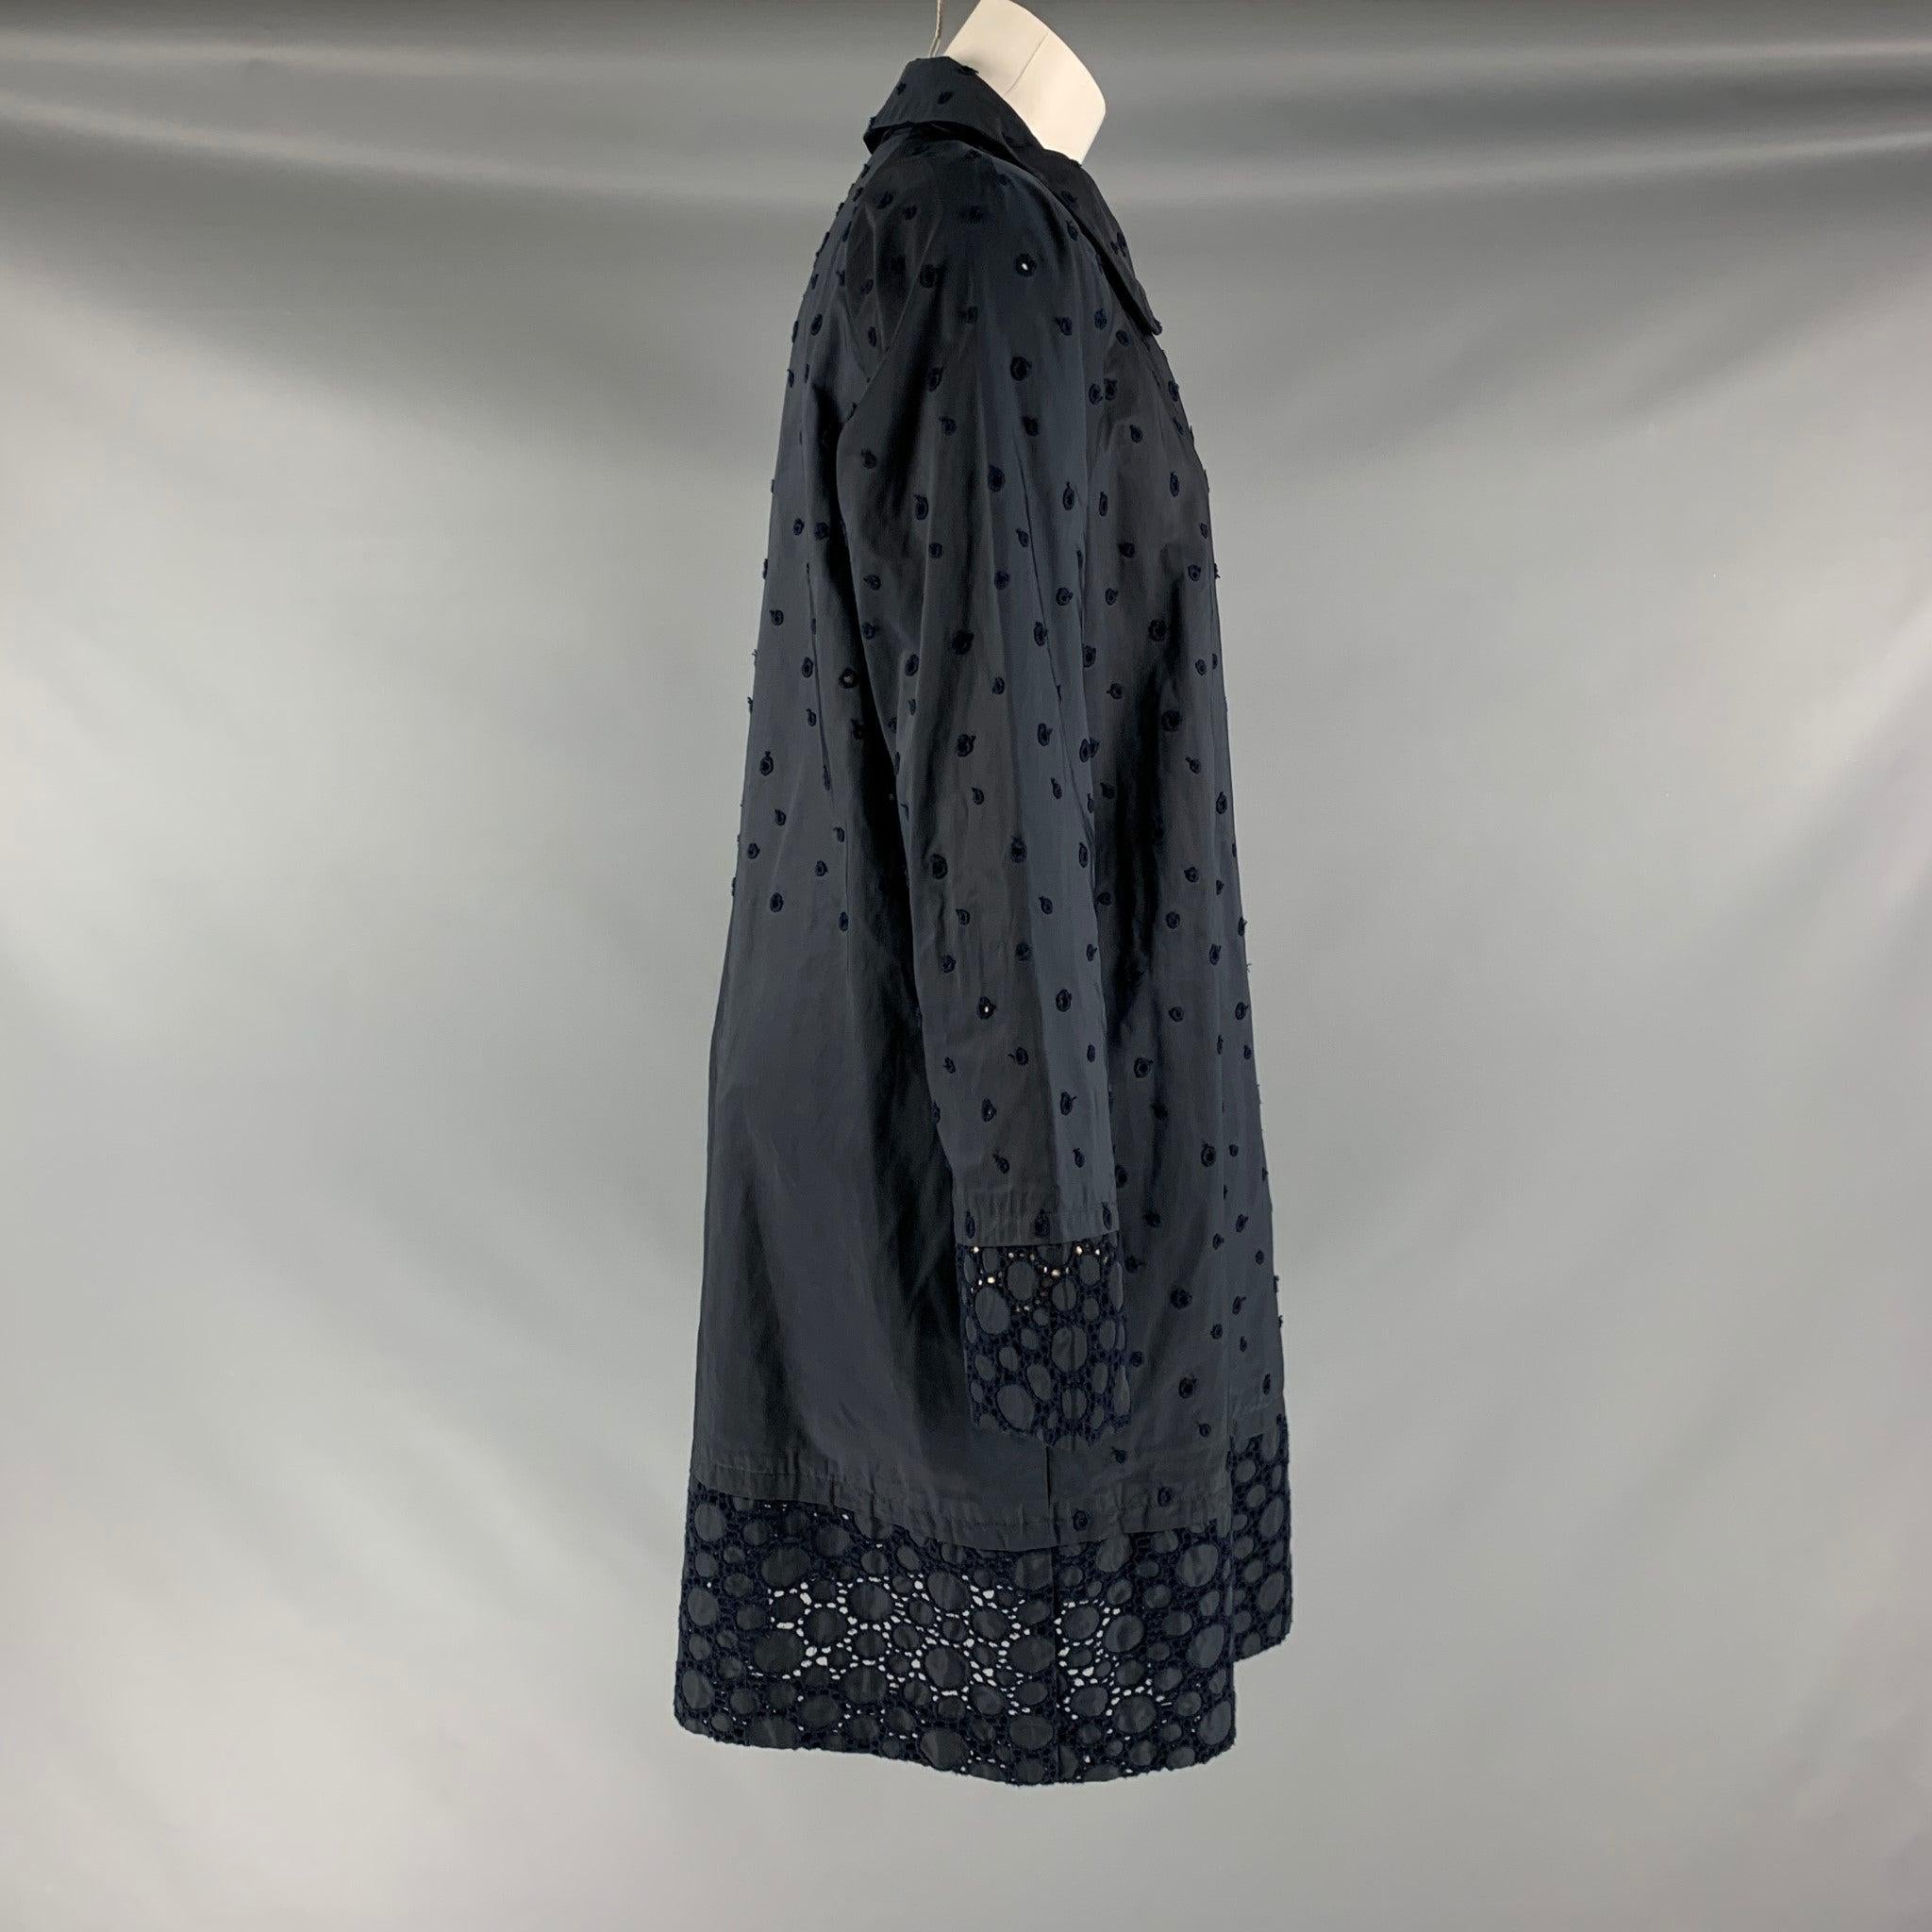 ISSEY MIYAKE HEART trench coat comes in a navy polyester eyelet woven featuring a slit pockets, eyelet texture,and a double breasted closure. Made in Japan.Excellent Pre-Owned Condition.  

Marked:   XL 

Measurements: 
 
Shoulder: 18.5 inches Bust: